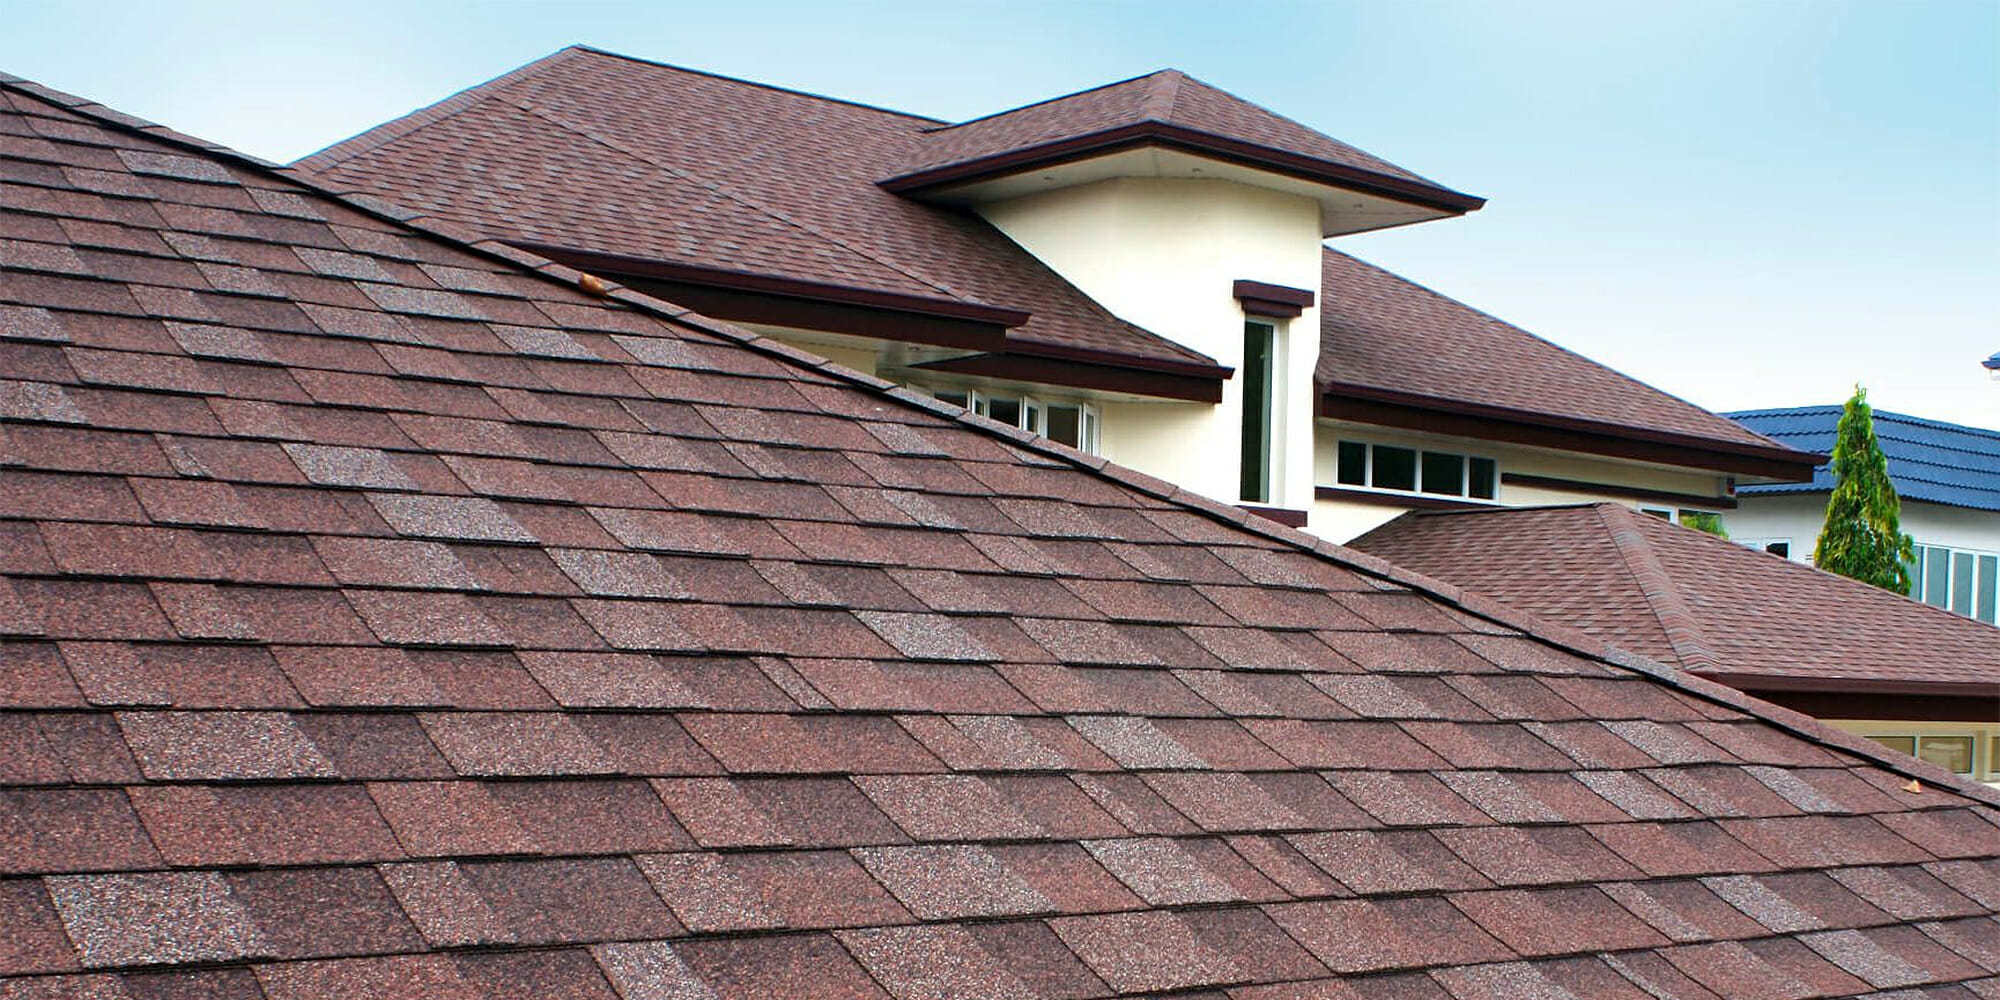 Roofing experts in Troup County, GA